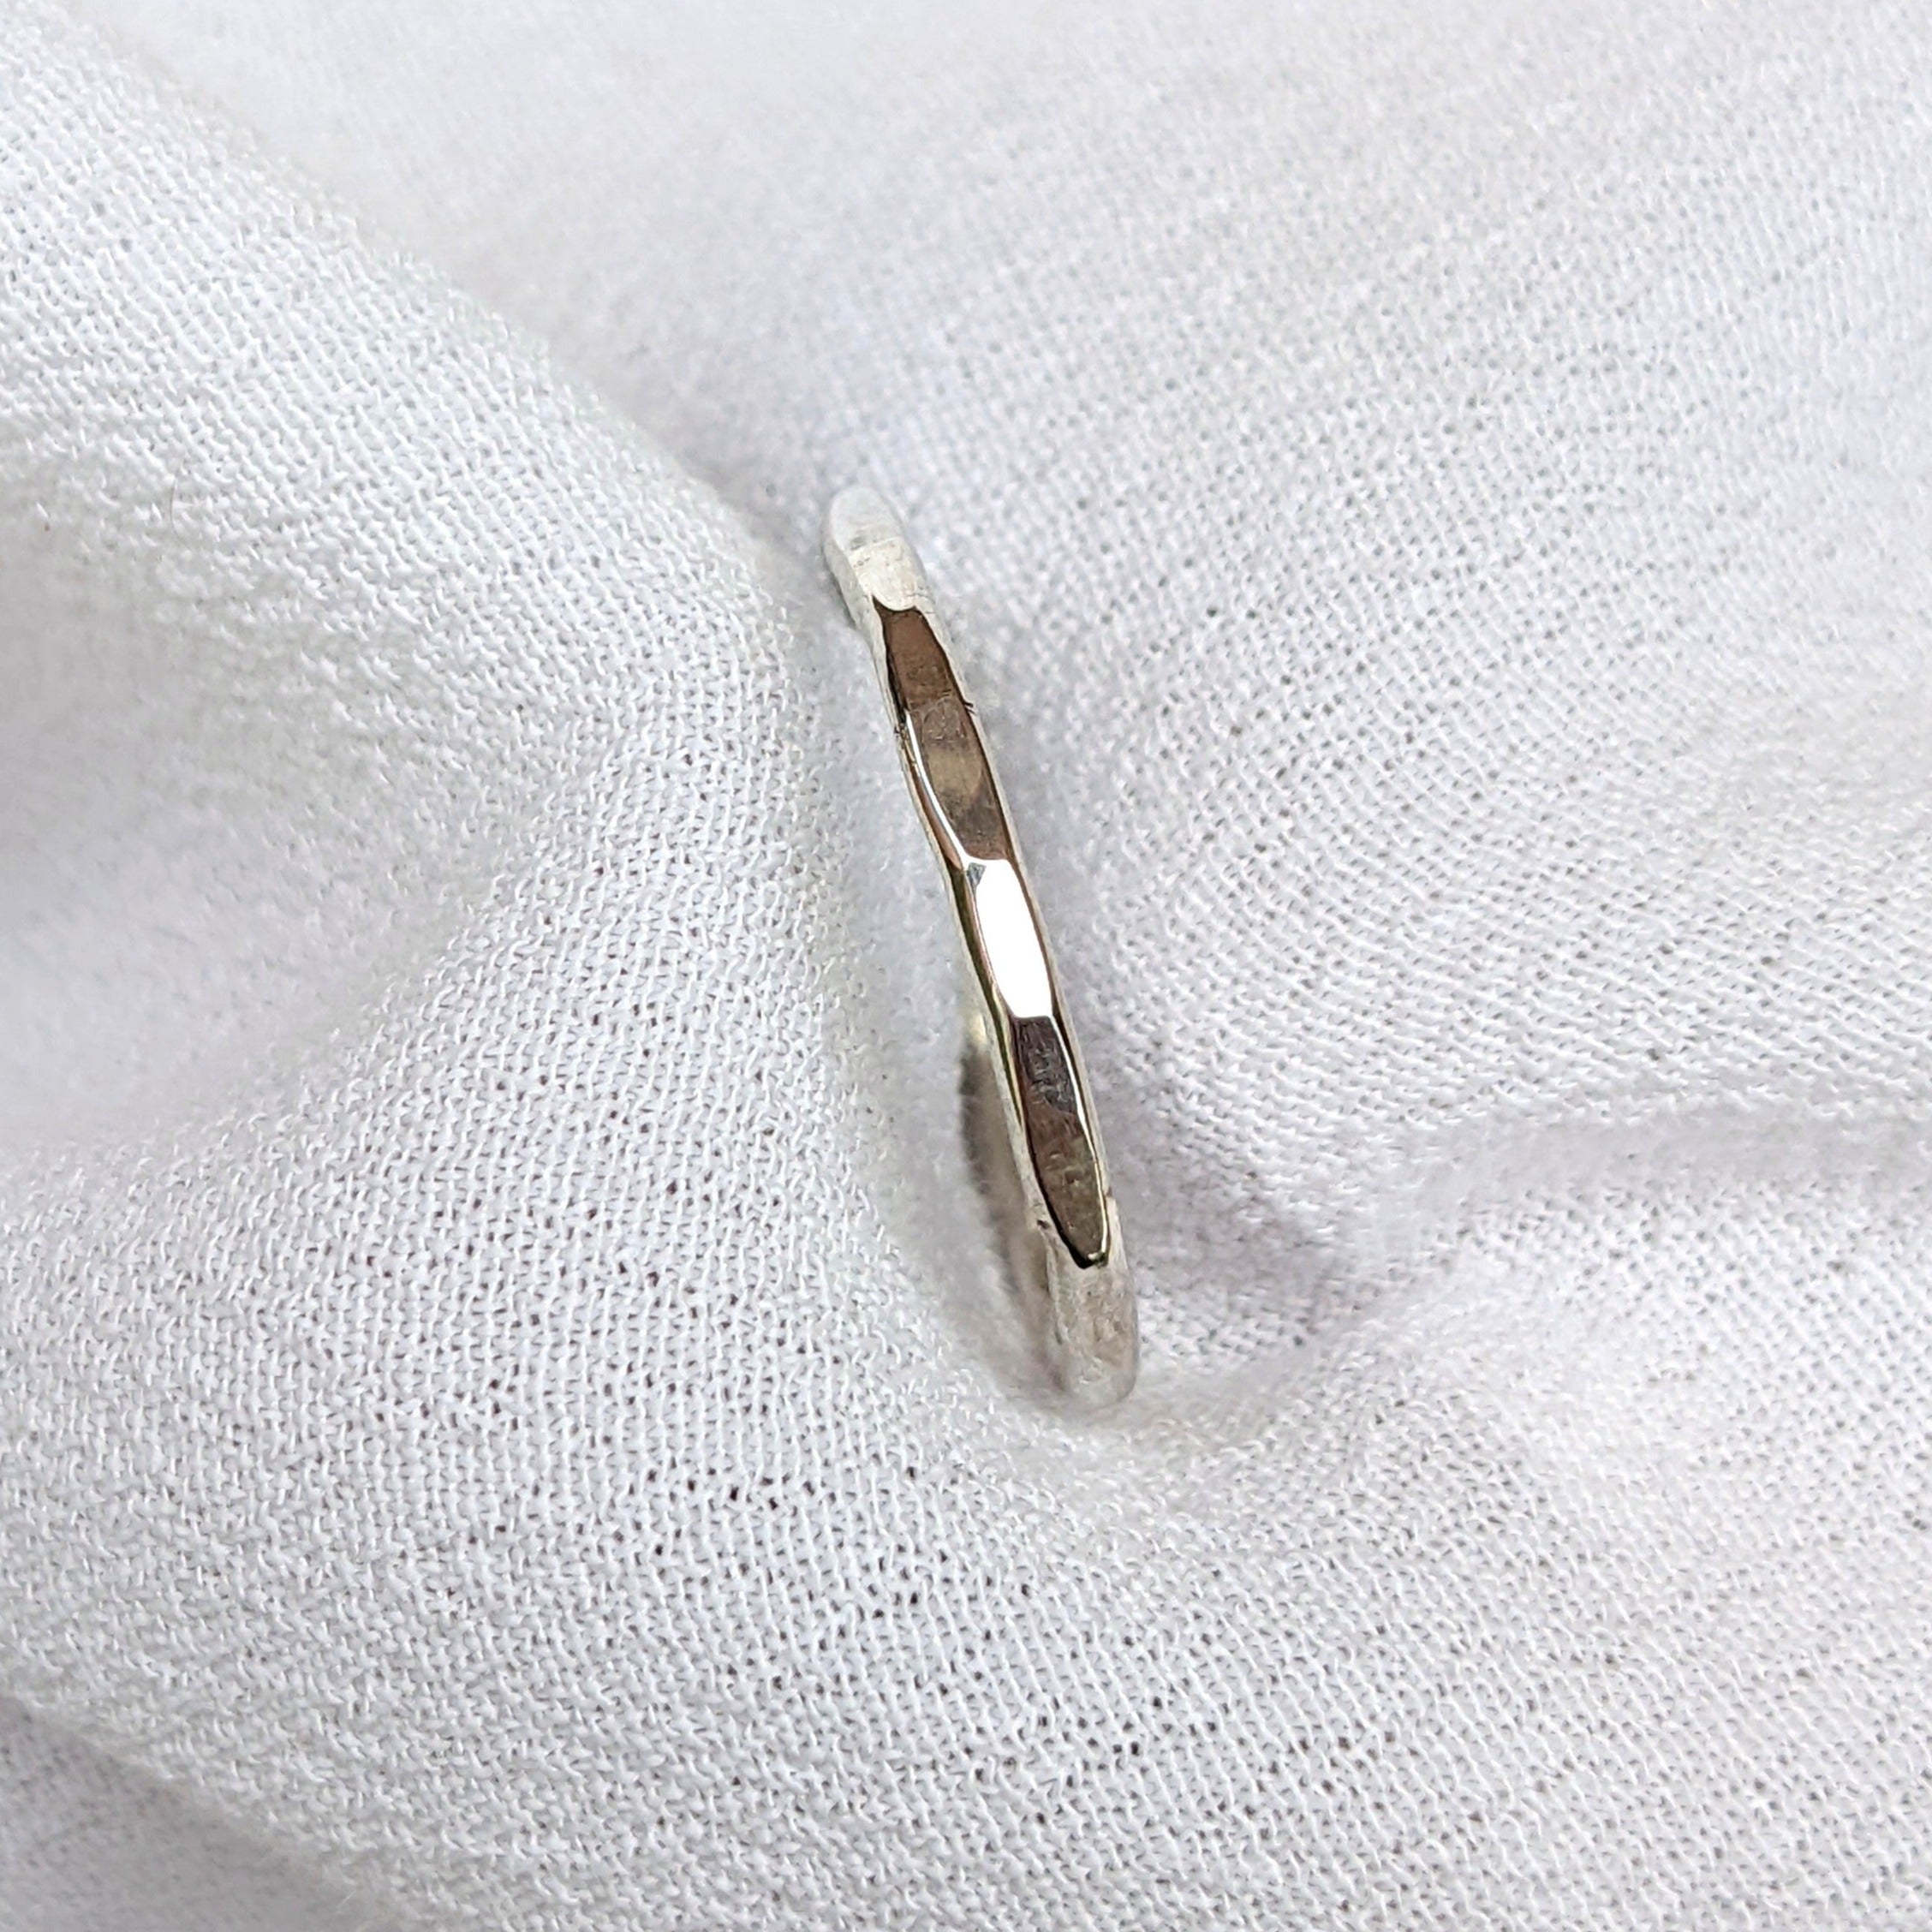 Hammered sterling silver ring held in white fabric